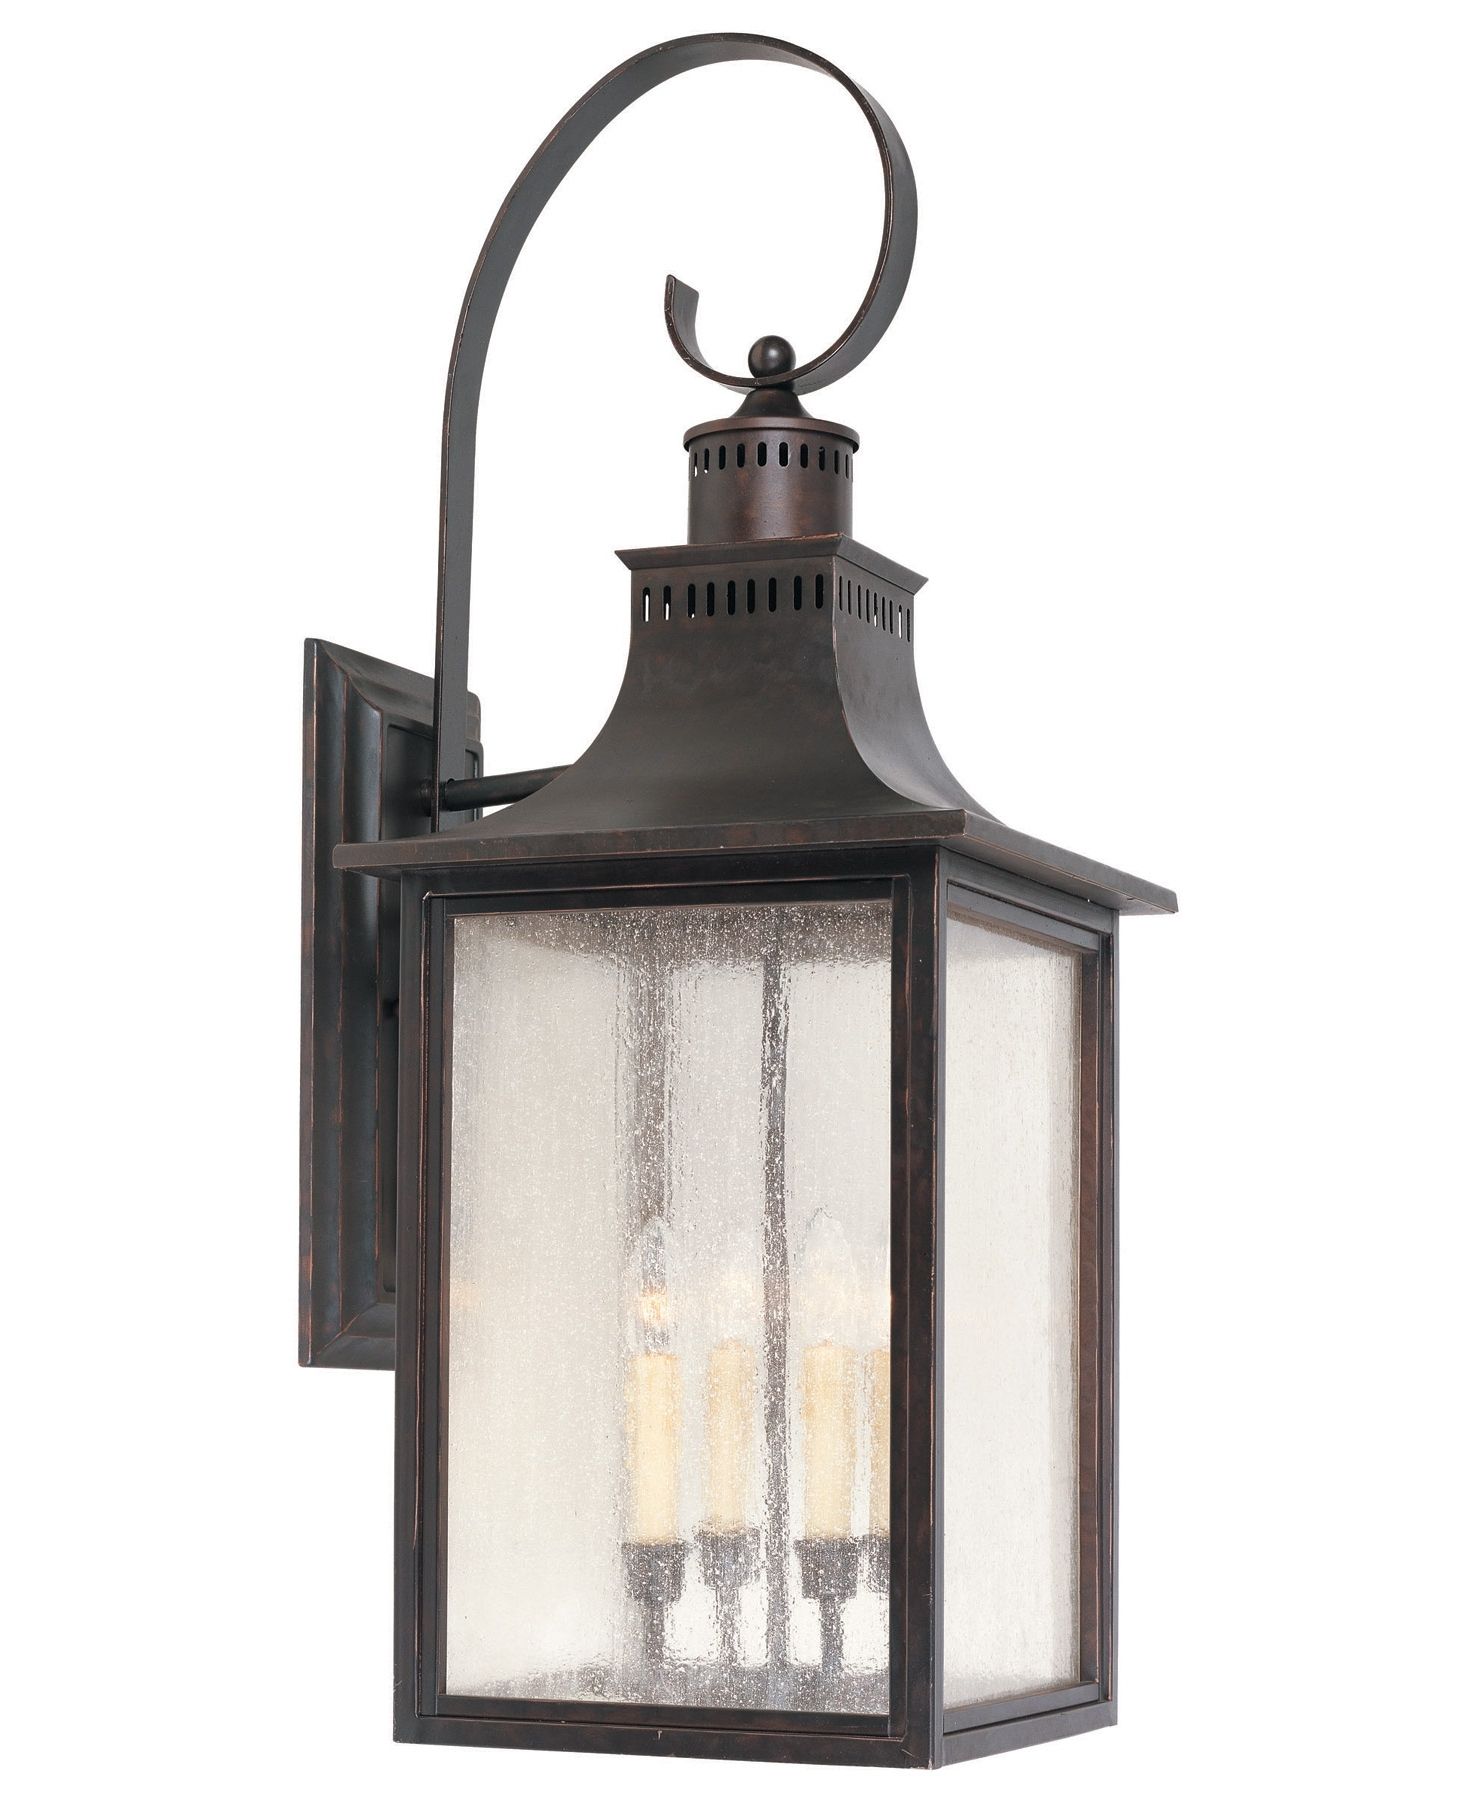 Savoy House 5 257 13 Monte Grande Outdoor Wall Mount Lantern Within Most Recently Released Wall Mounted Outdoor Lanterns (View 1 of 20)